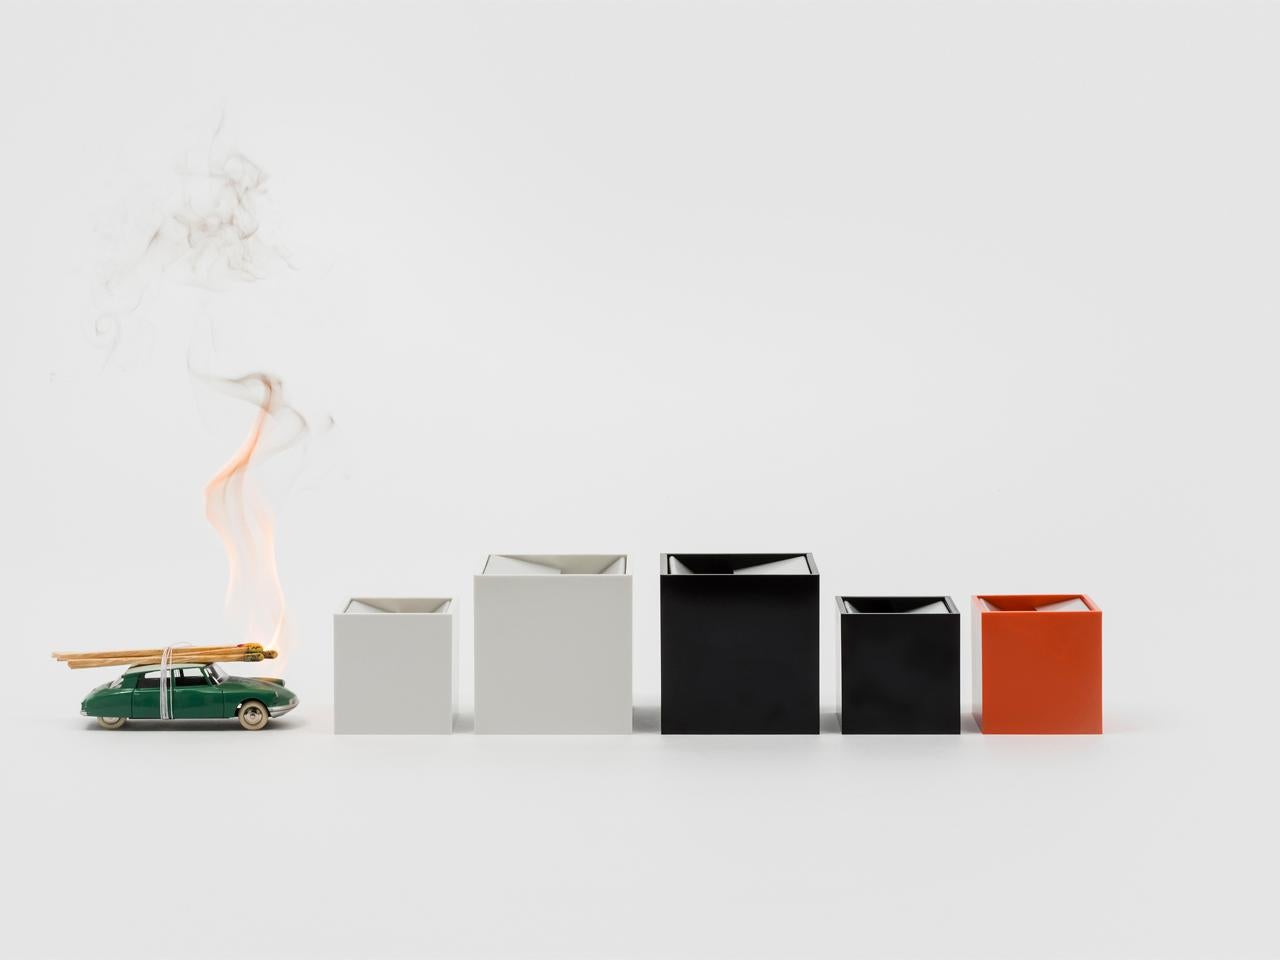 Small White Cubo is an ashtray made up of two simple elements: a cube shaped shell open on one side contains an element made of bent sheet metal. This element is designed so that the acute angle of one end of the sheet makes the ash fall inside